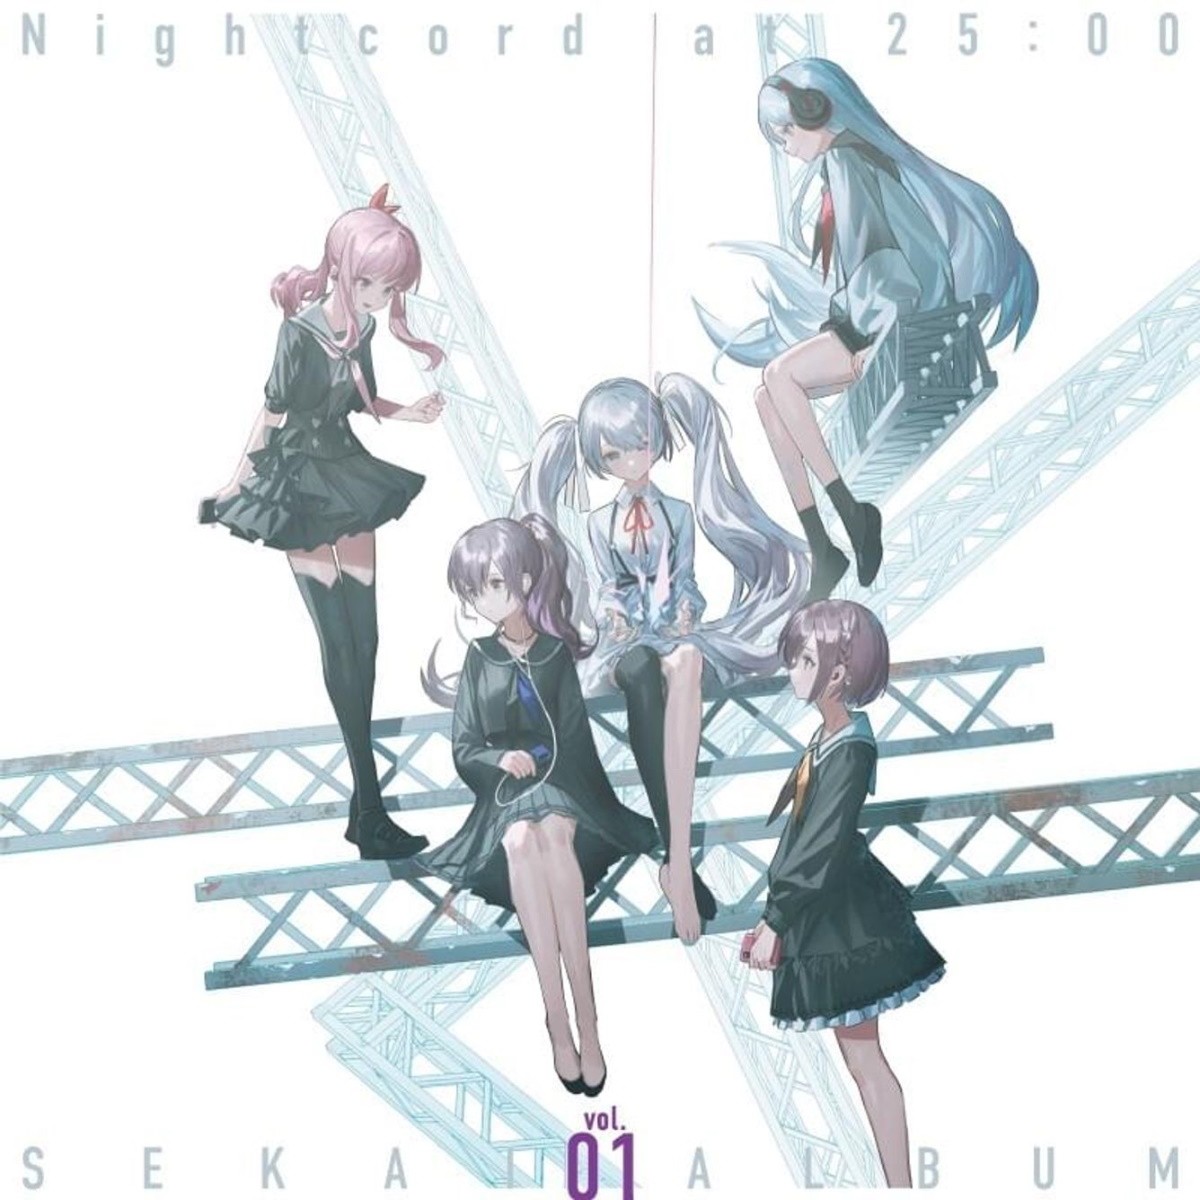 Cover for『Nightcord at 25:00 - Hitorinbo Envy』from the release『Nightcord at 25:00 SEKAI ALBUM vol.1』